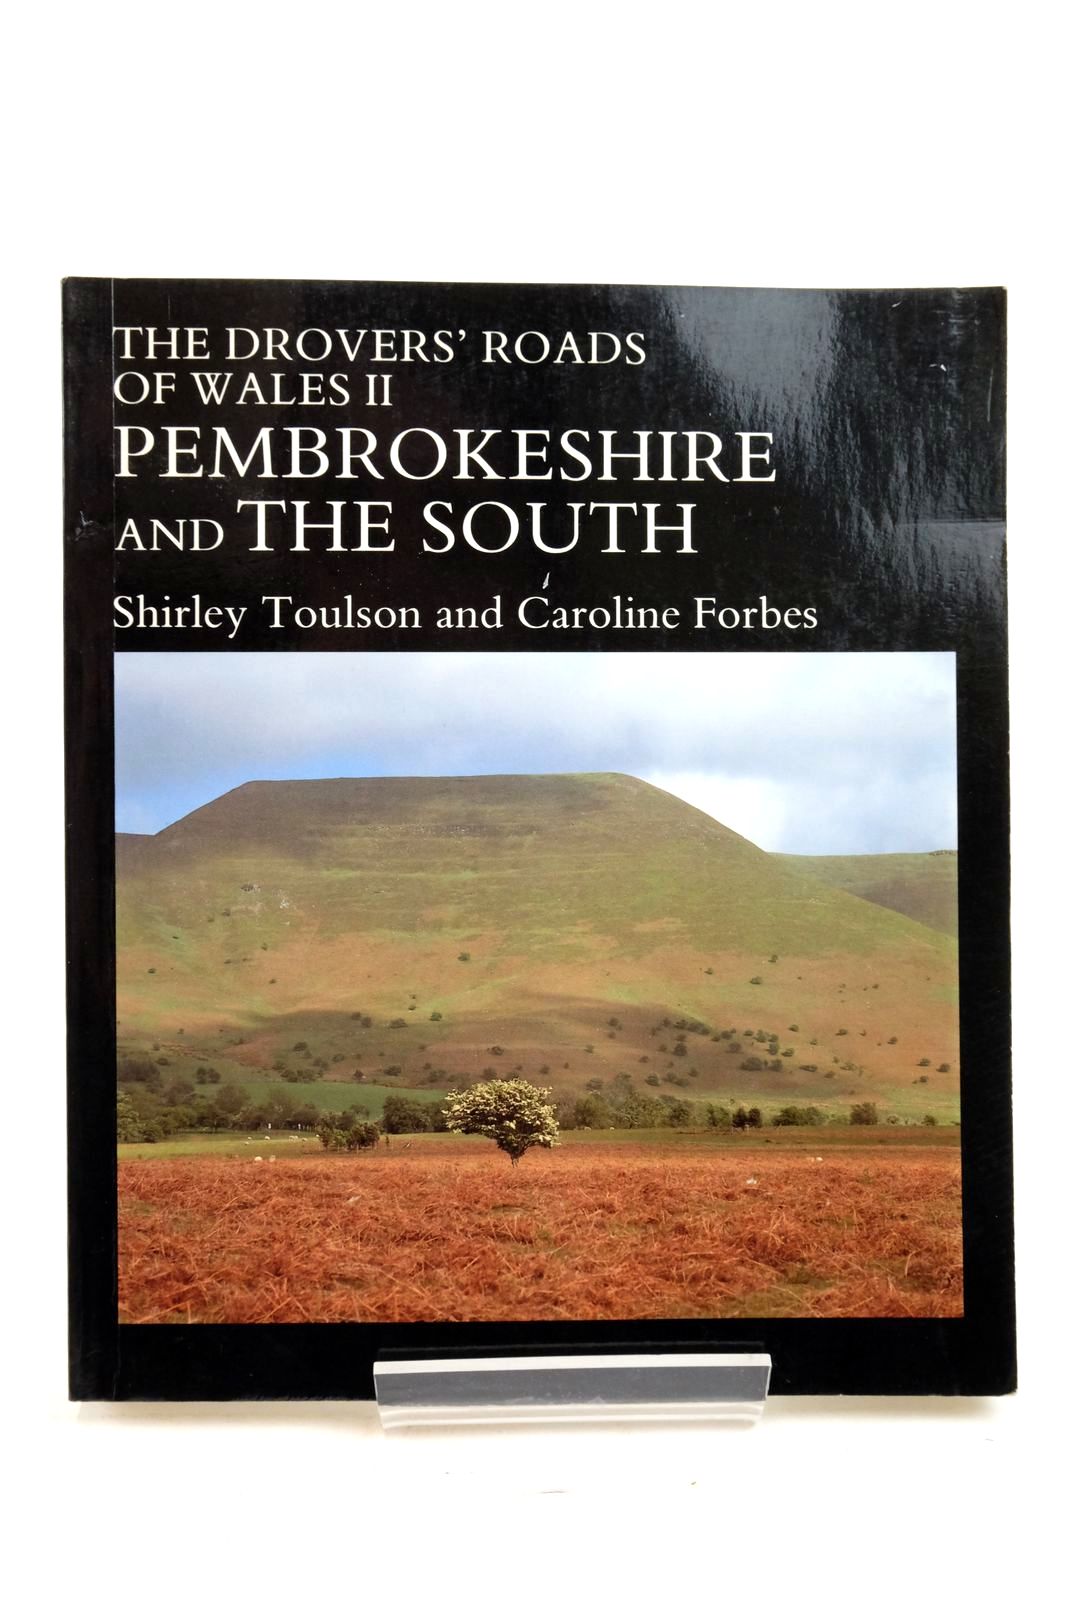 Photo of THE DROVERS' ROADS OF WALES II PEMBROKESHIRE AND THE SOUTH- Stock Number: 2137101